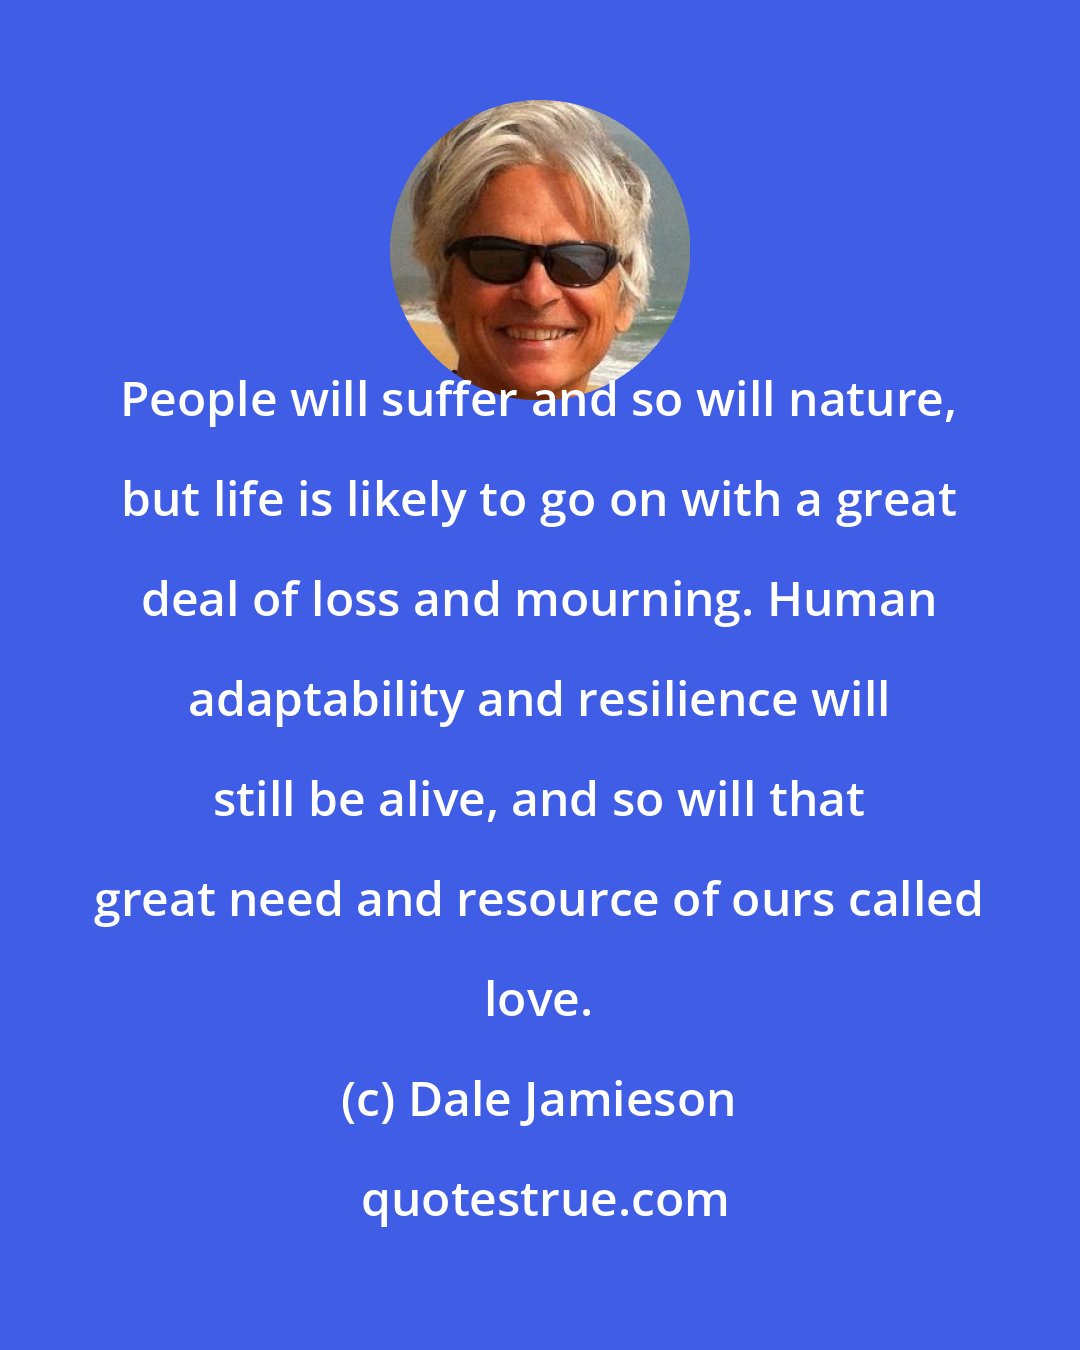 Dale Jamieson: People will suffer and so will nature, but life is likely to go on with a great deal of loss and mourning. Human adaptability and resilience will still be alive, and so will that great need and resource of ours called love.